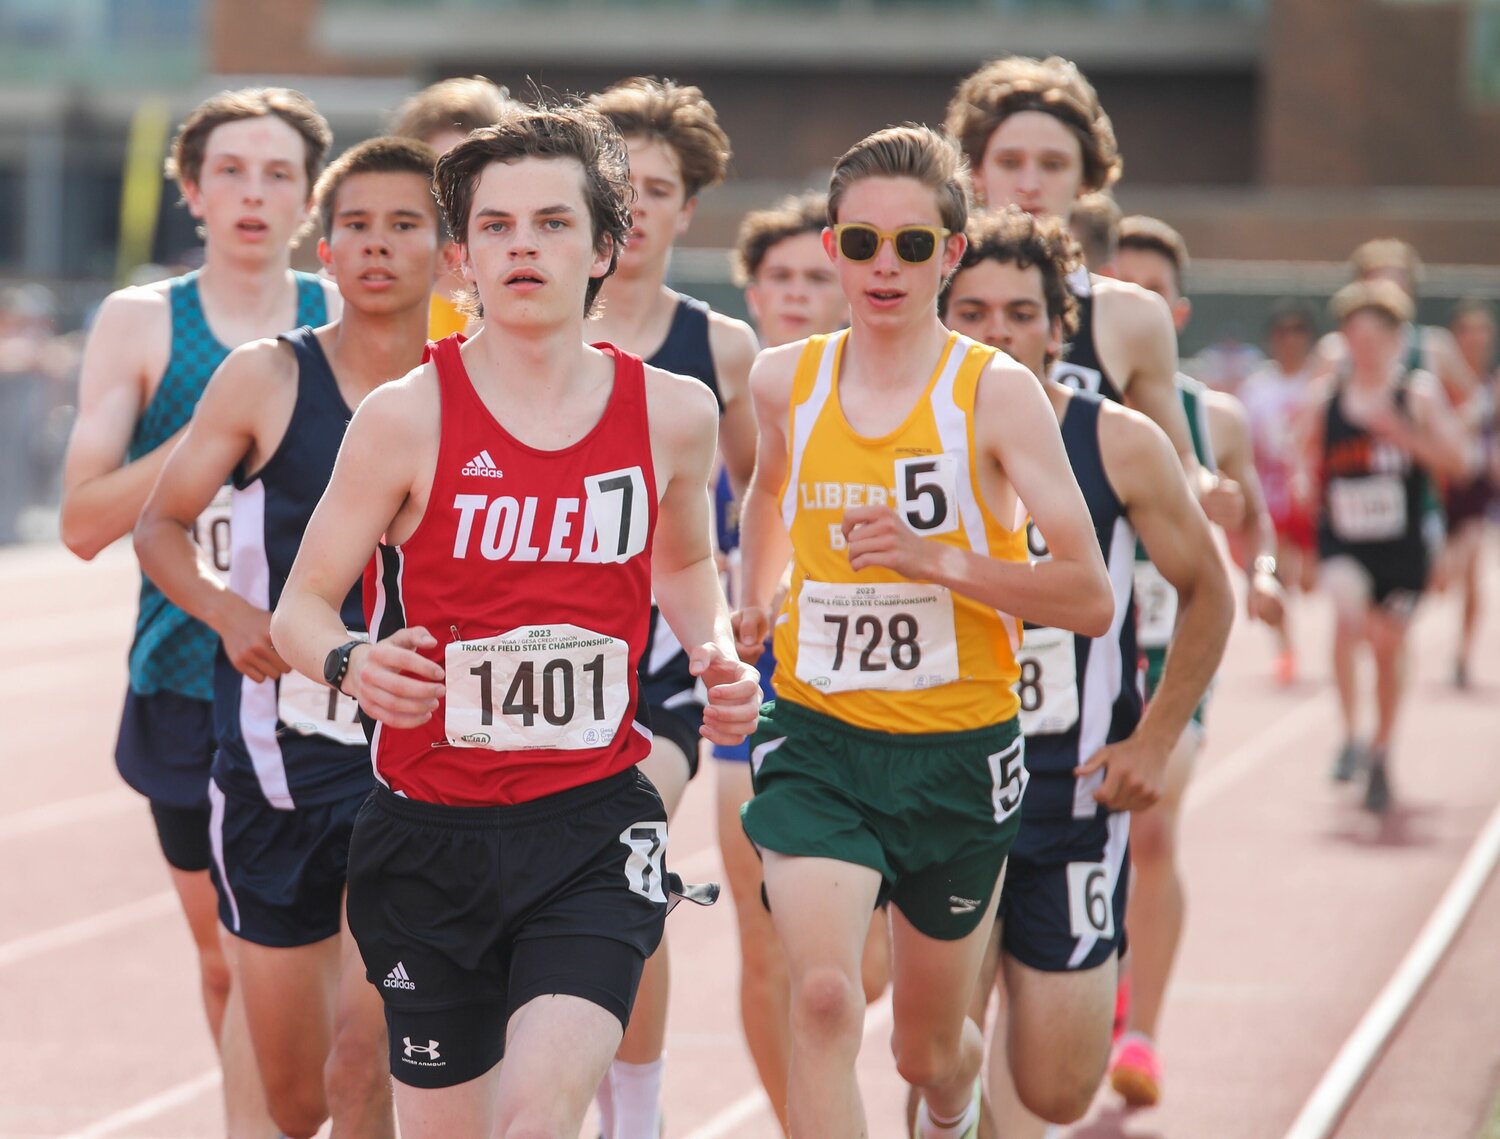 Toledo's Treyton Marty leads the pack during the boys 3,200 meters at the 2B state championships, May 27 in Yakima. Marty finished seventh.